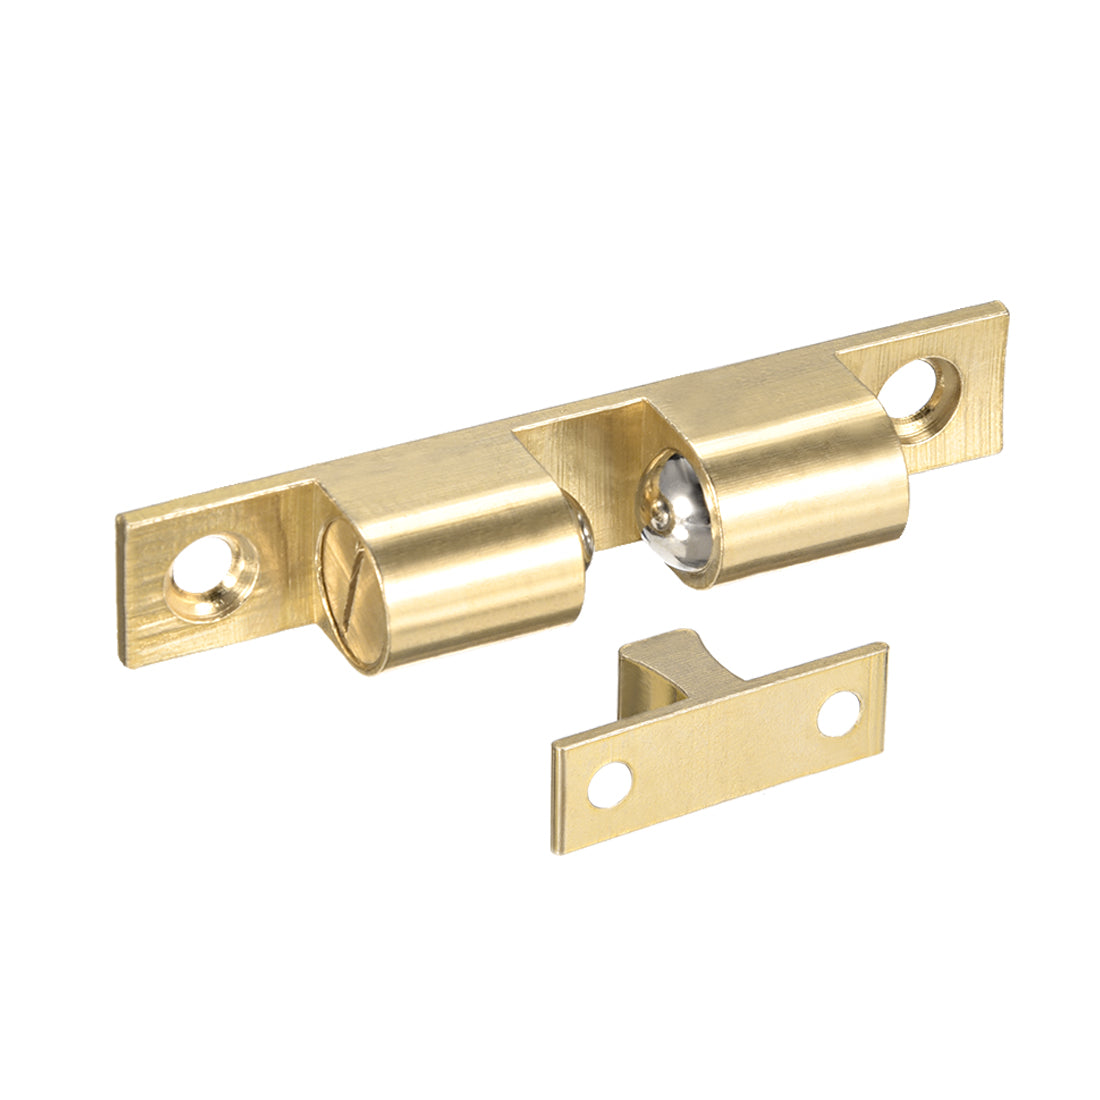 uxcell Uxcell Cabinet Door Closet Brass Double Ball Catch Tension Latch 70mm Length Gold Tone 2pcs